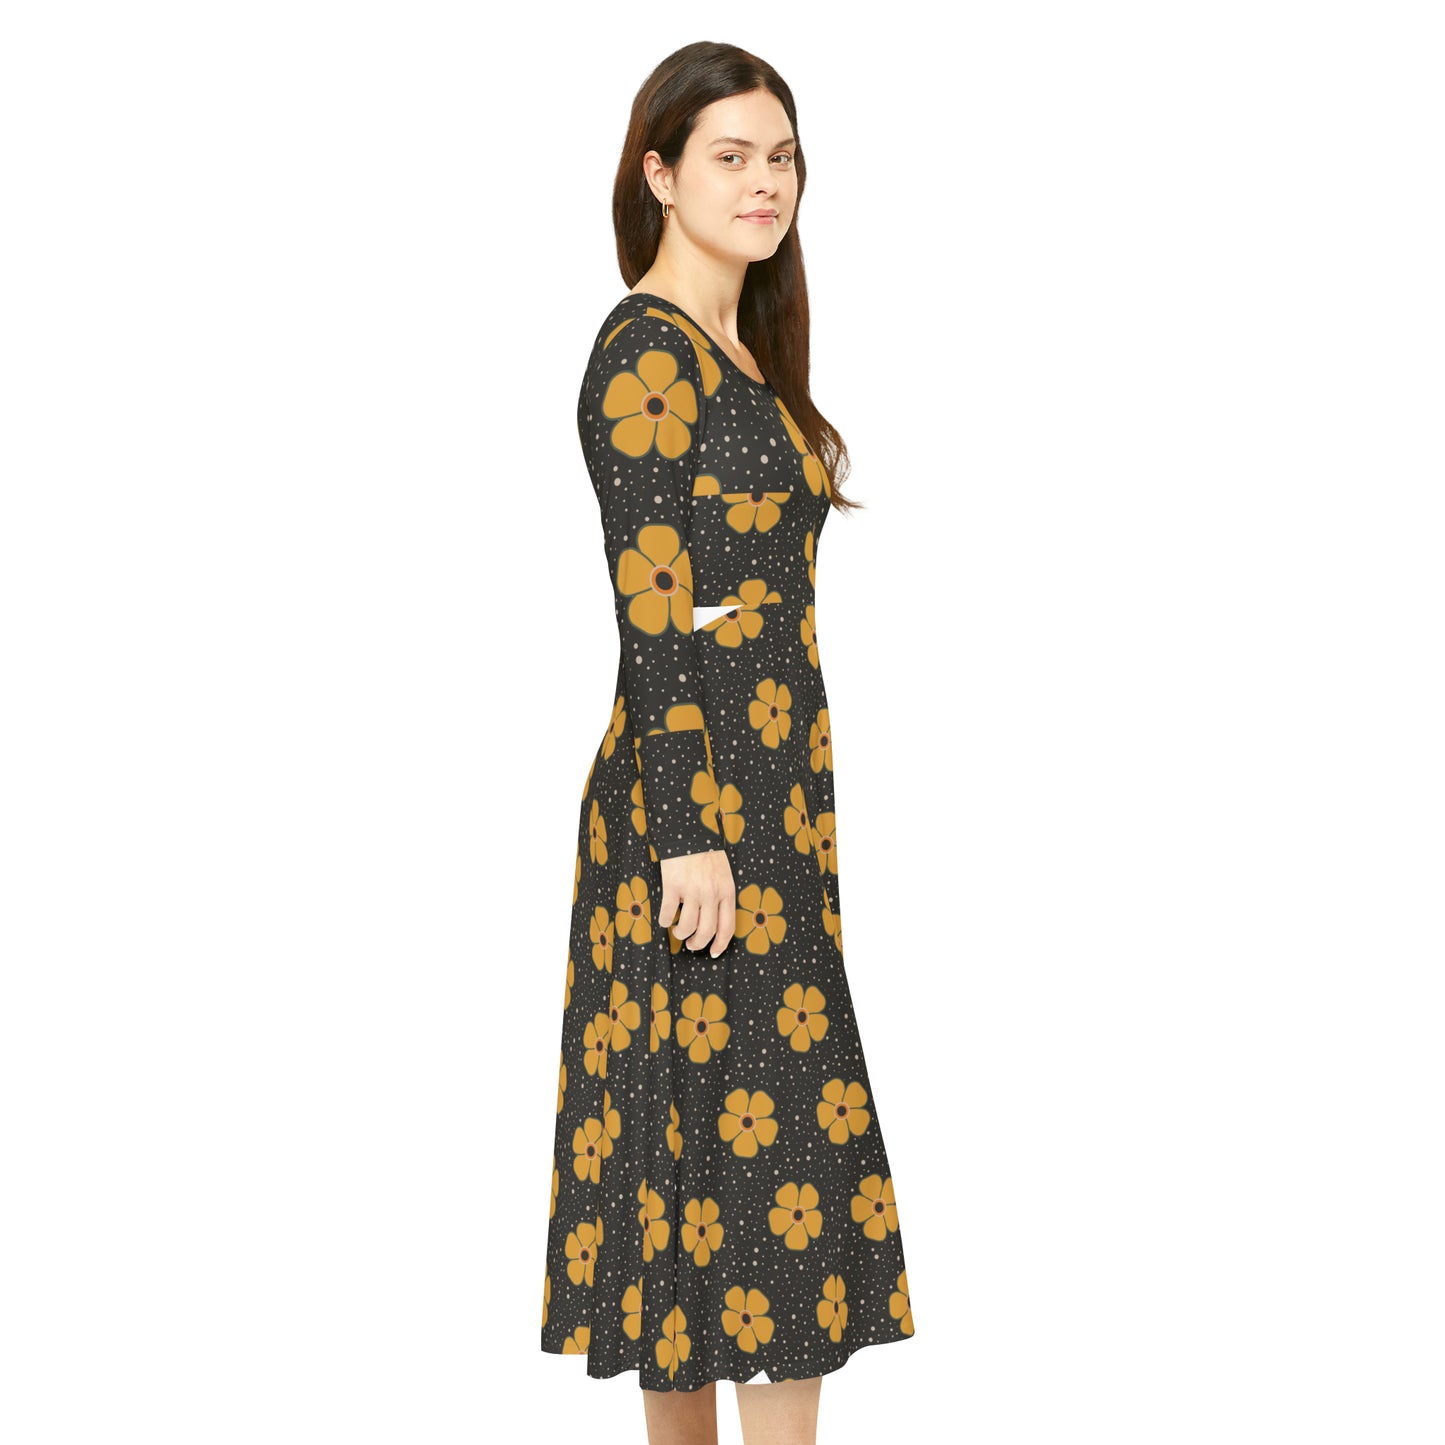 Black Dress Yellow Flowers-Long Sleeve Dress Collection